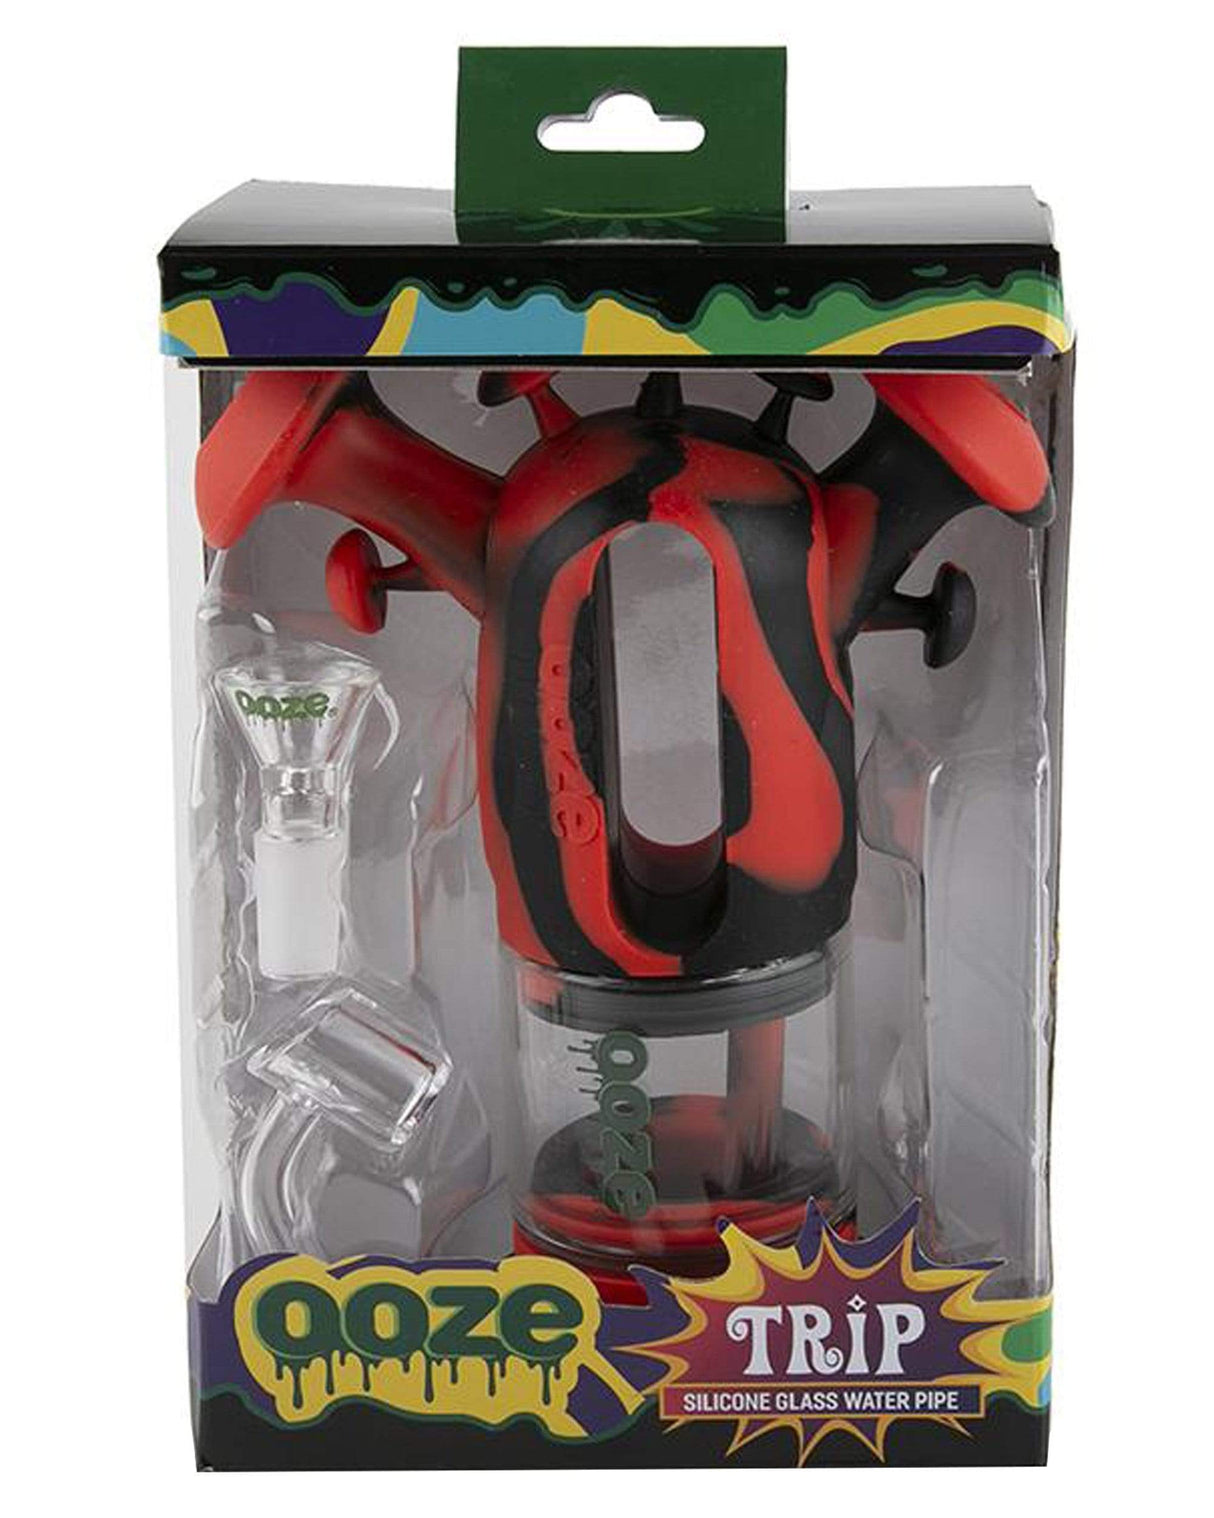 Ooze Trip Silicone Bubbler in Rasta color, front view in packaging with quartz bowl and percolator